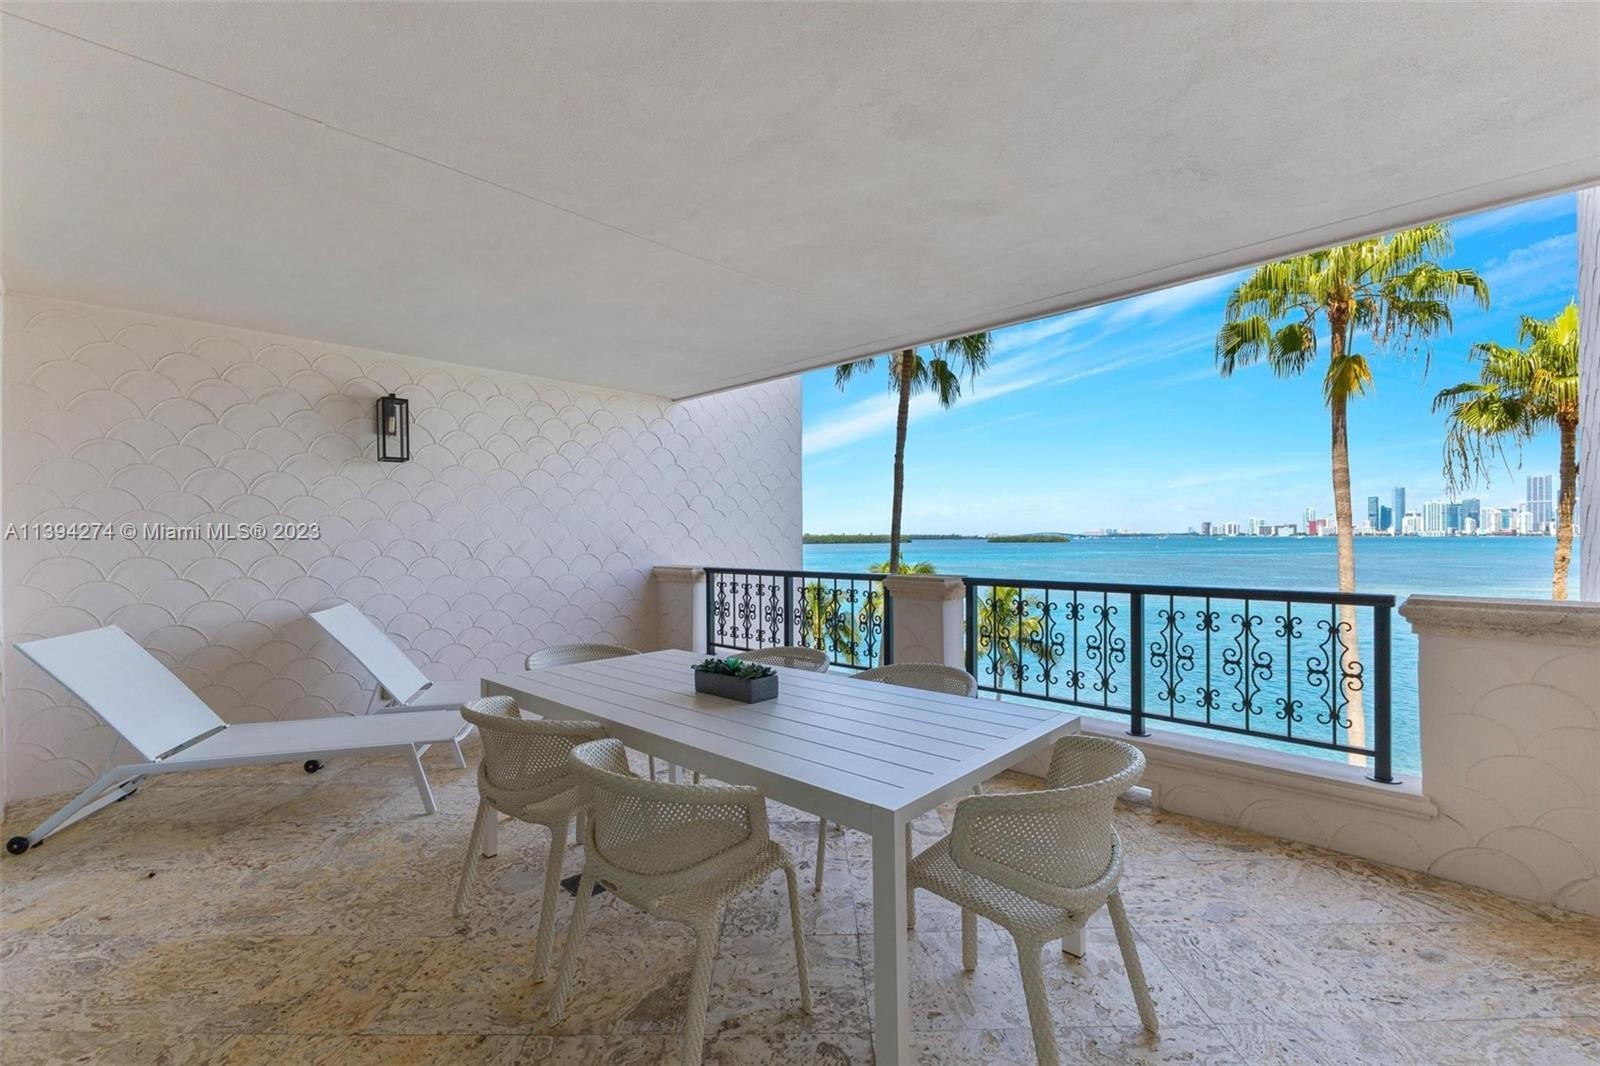 31. 5245 Fisher Island Dr